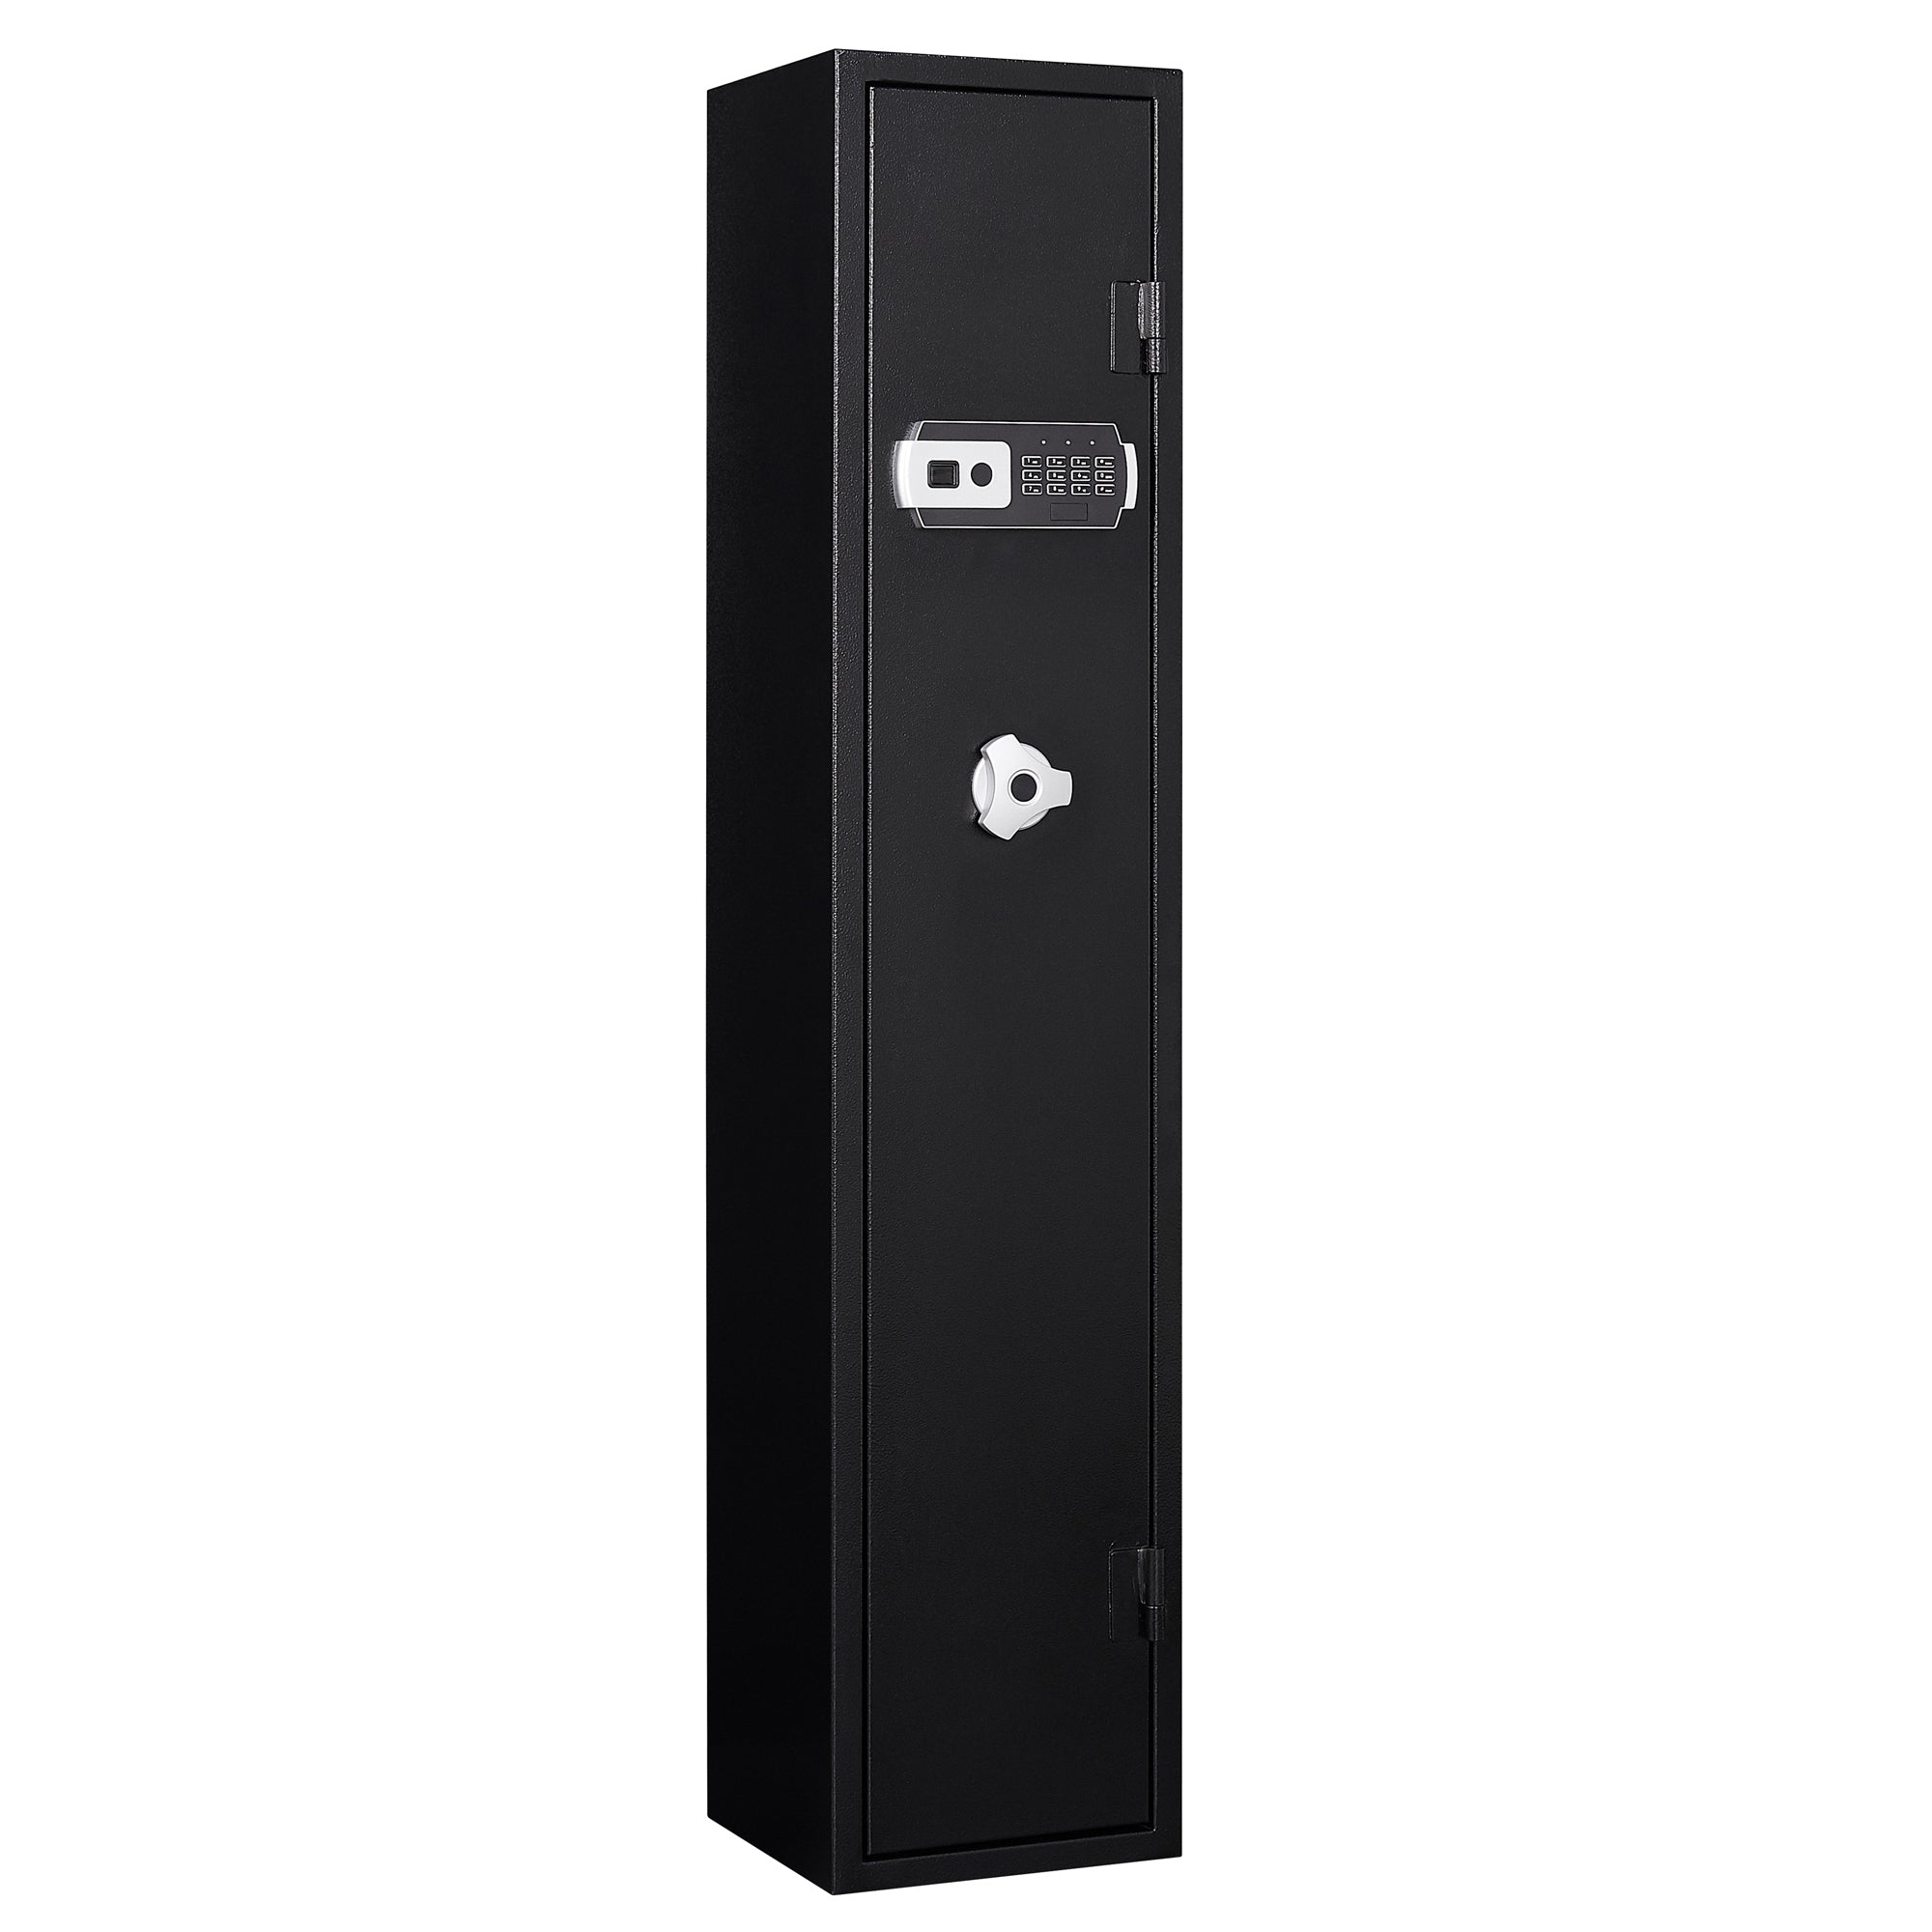 5 Gun Safe for Home Rifle and Pistols, Quick Access black-steel